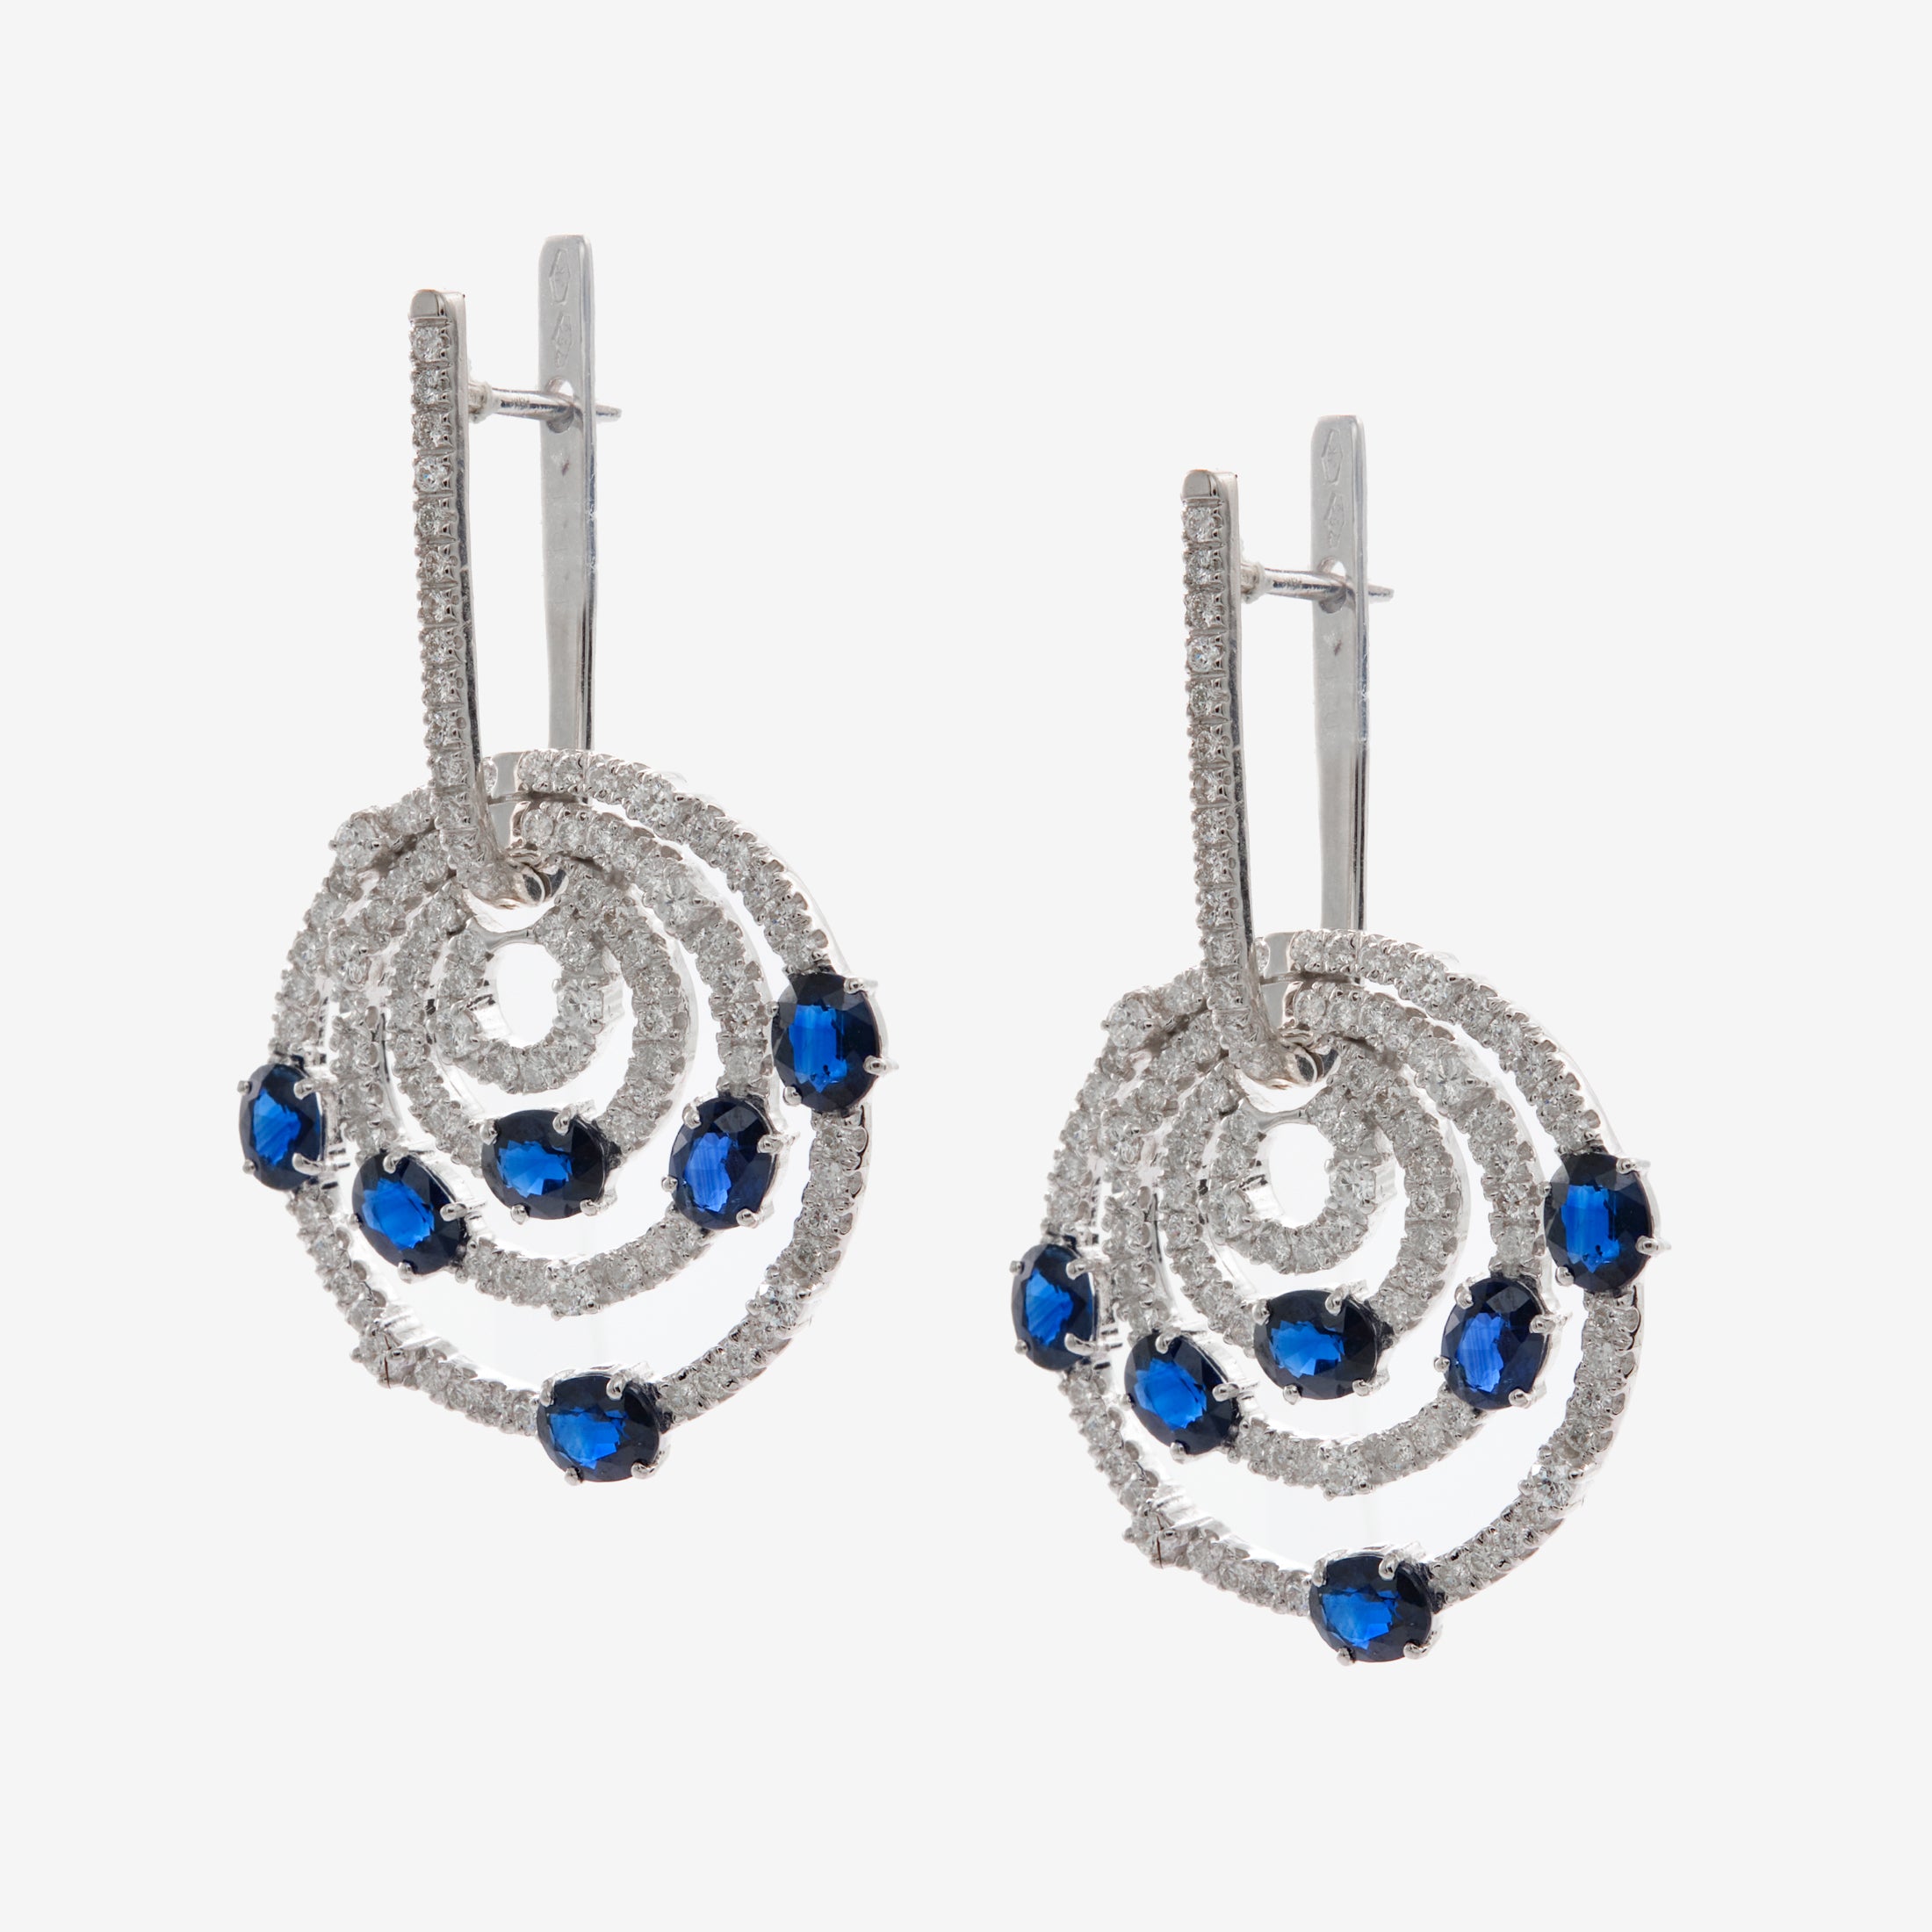 Fiorela earrings with sapphires and diamonds